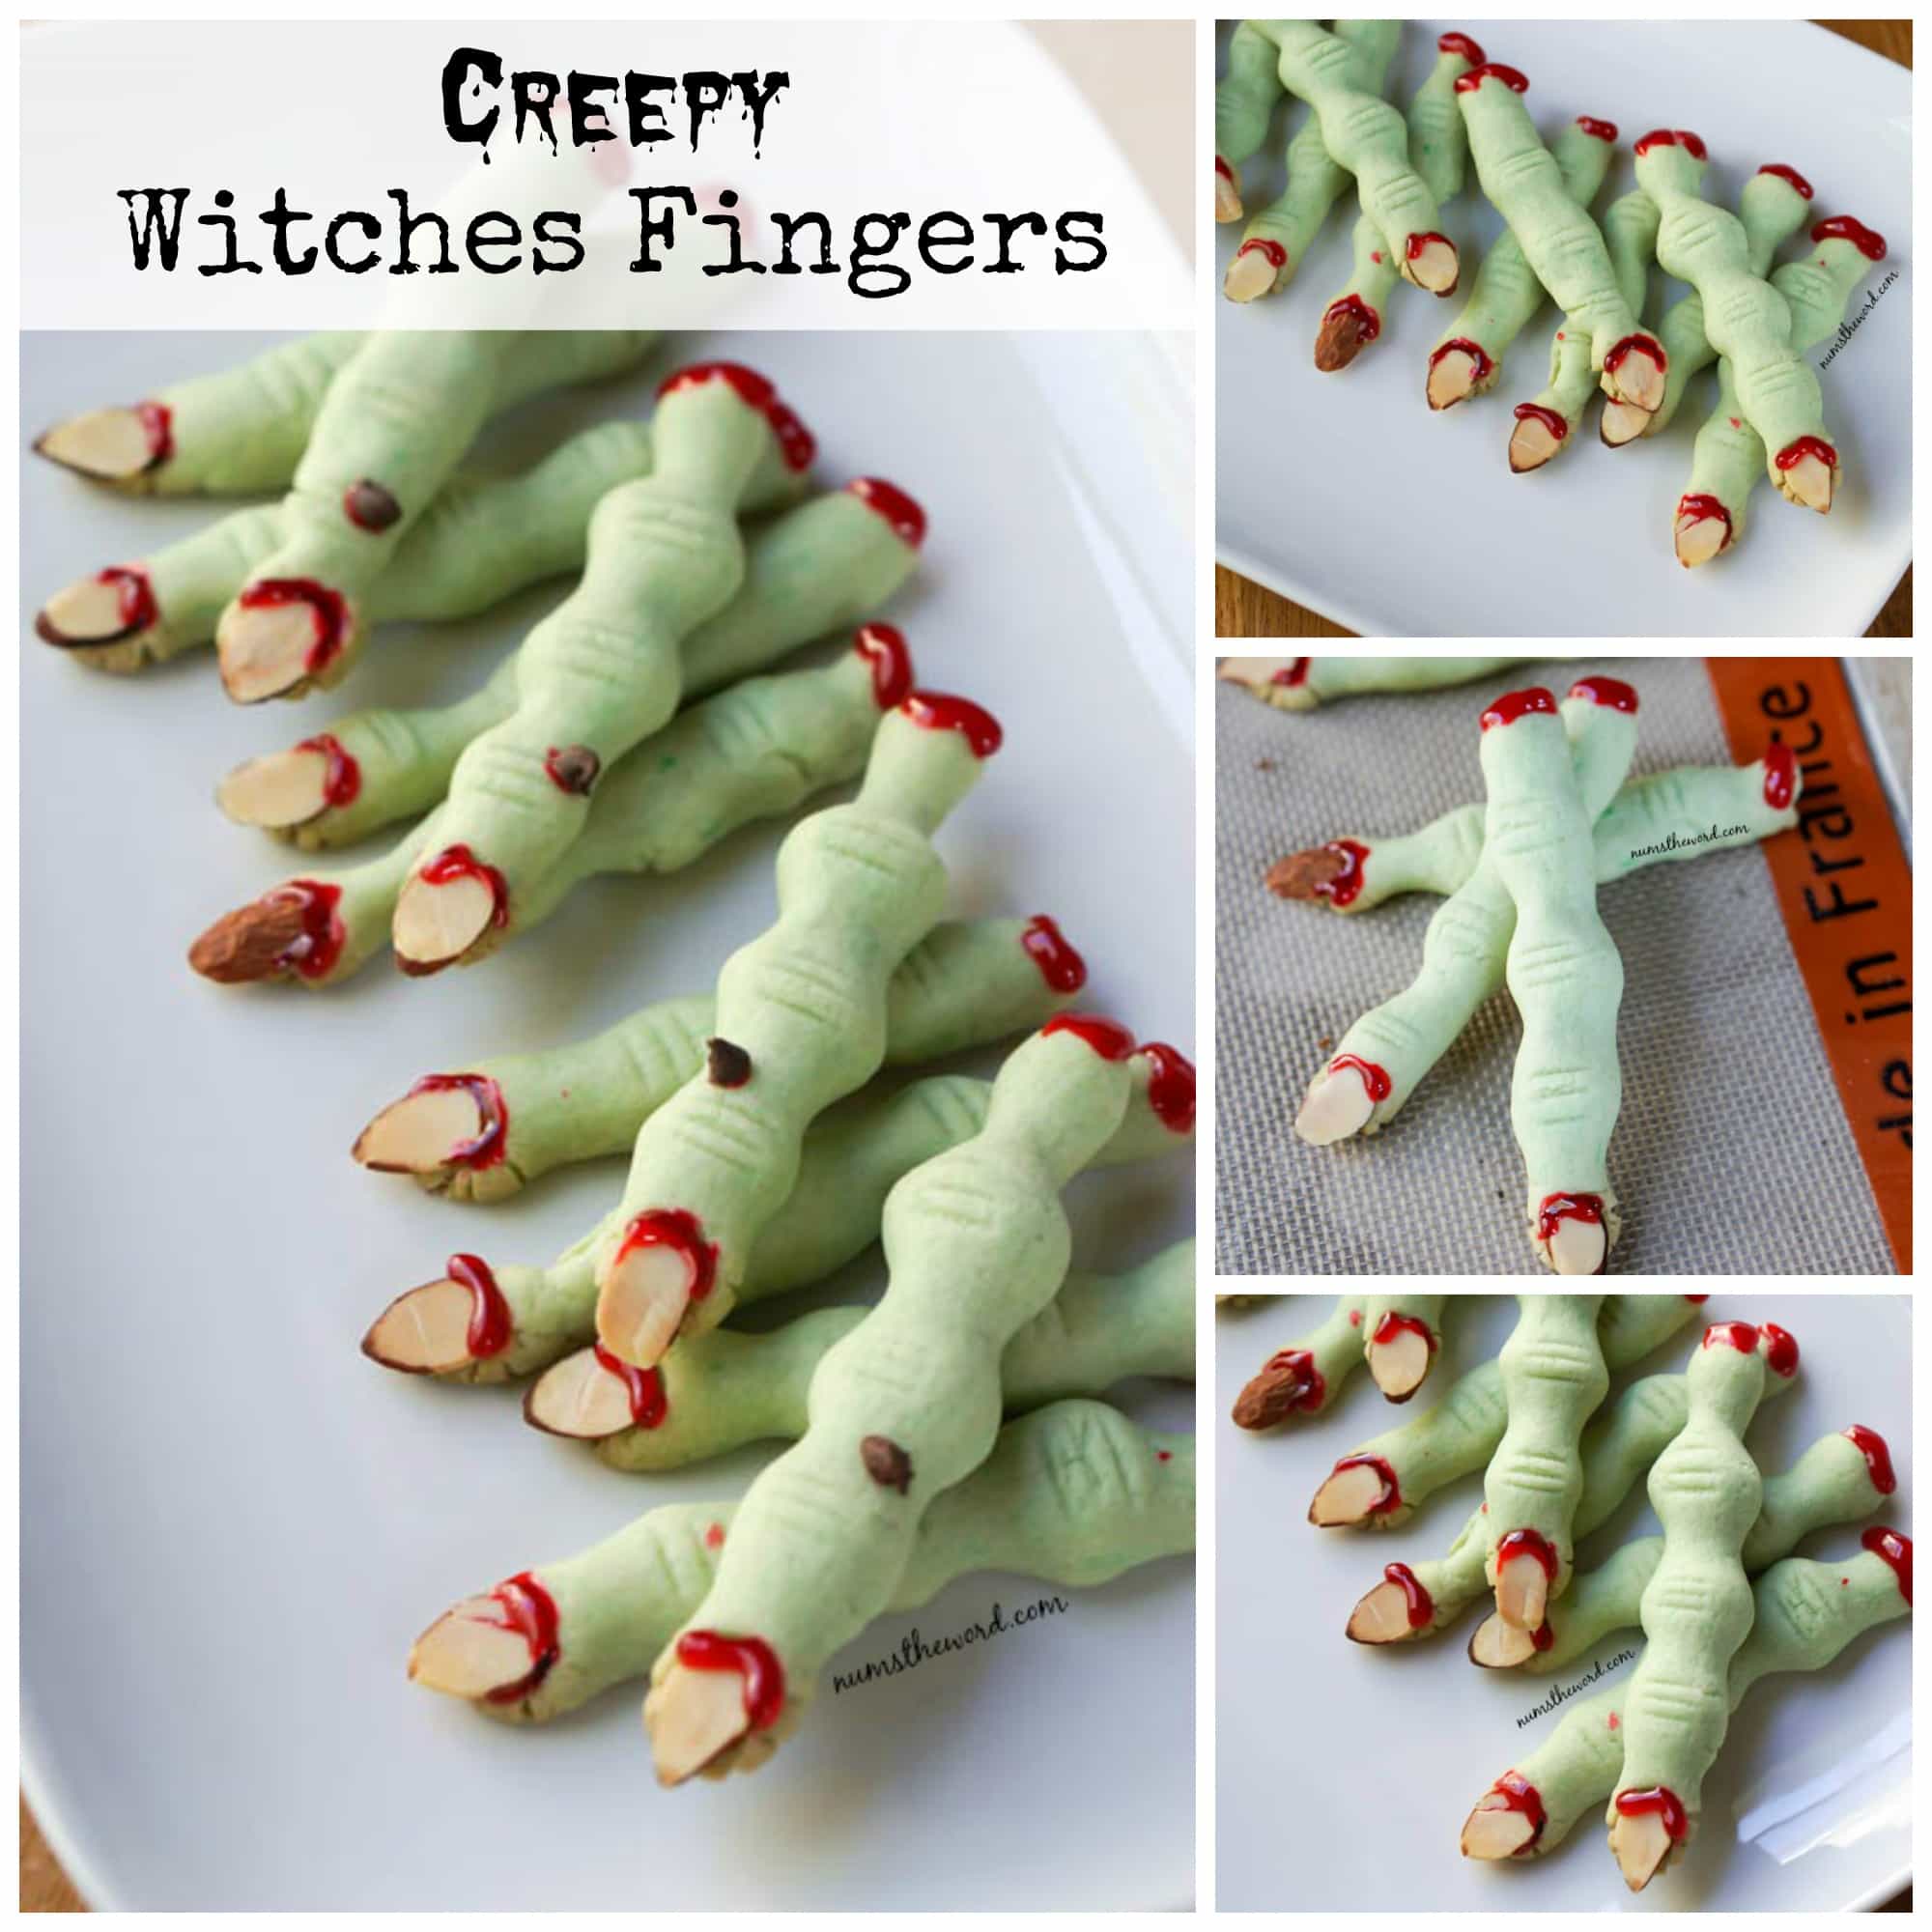 Creepy Witches Fingers